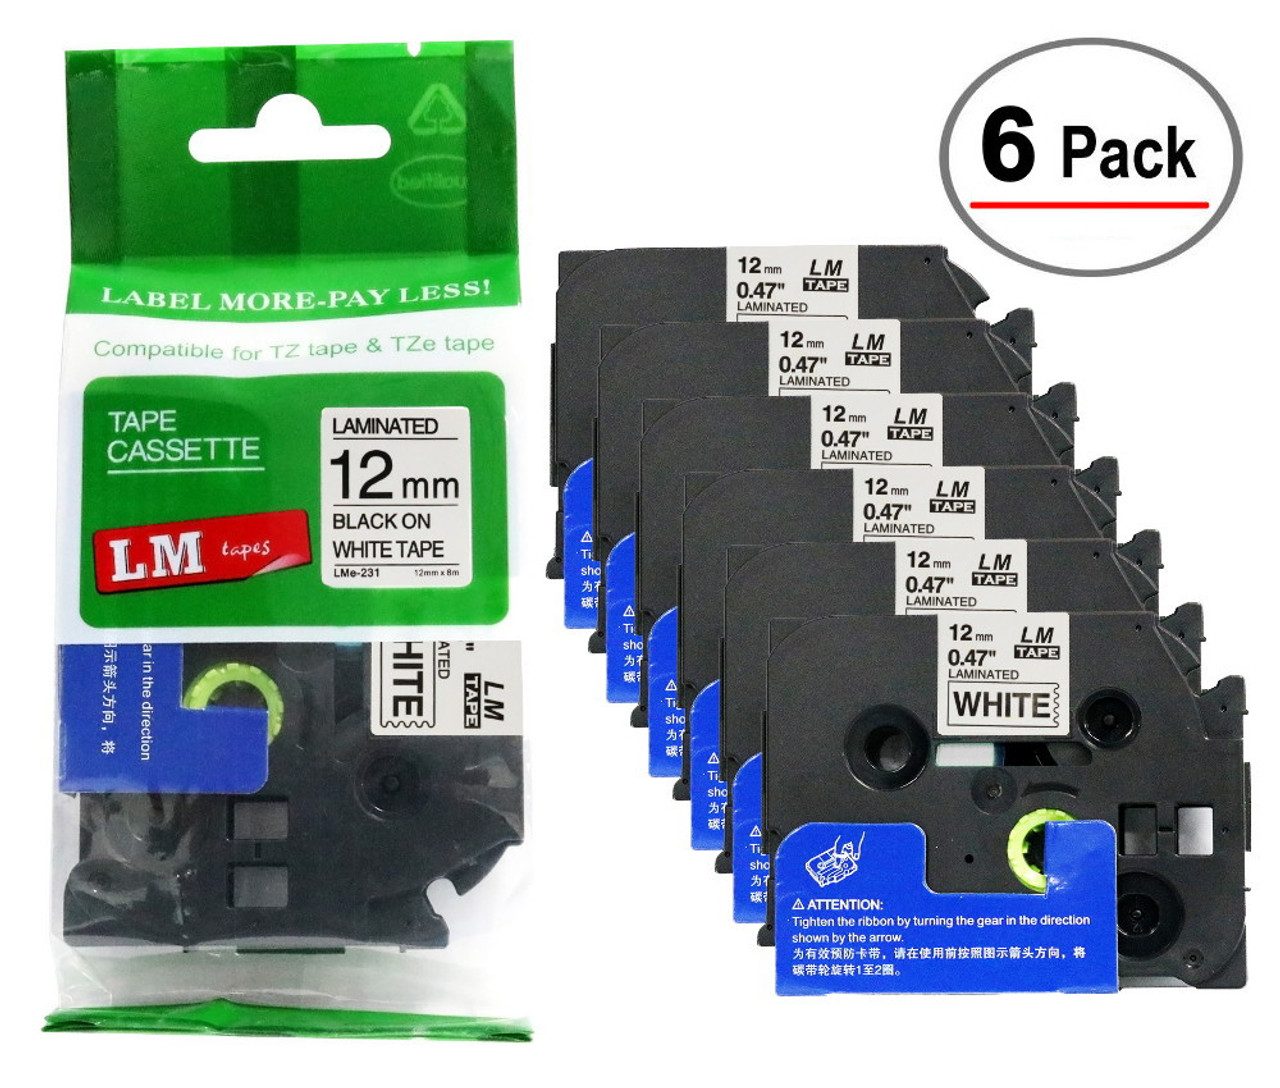 Hehua 6 Pack Compatible Label Tape Replacement for Brother P-touch M Tape  1/2 MK231